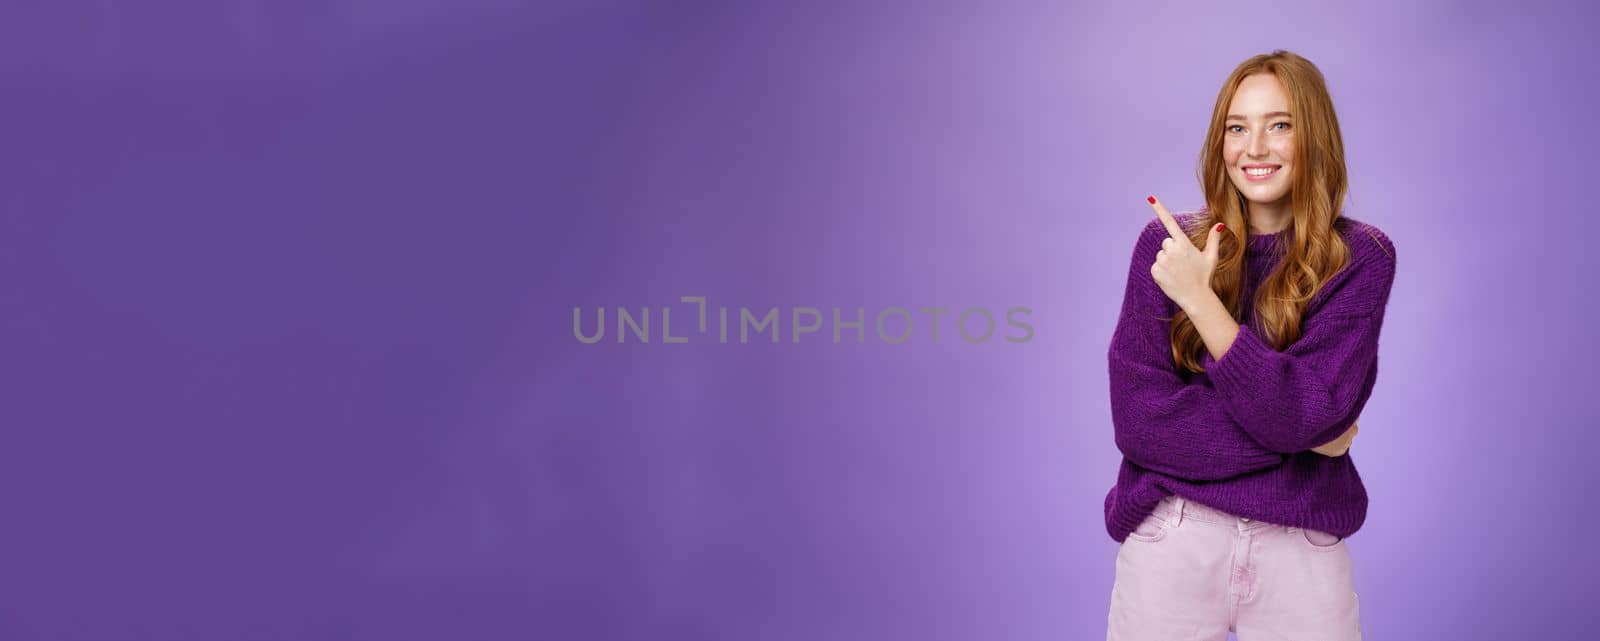 Lifestyle. Charming friendly-looking bright redhead woman with freckles and makeup in purple warm sweater pointing at upper left corner and smiling delighted and cute at camera as showing cool place hang out.